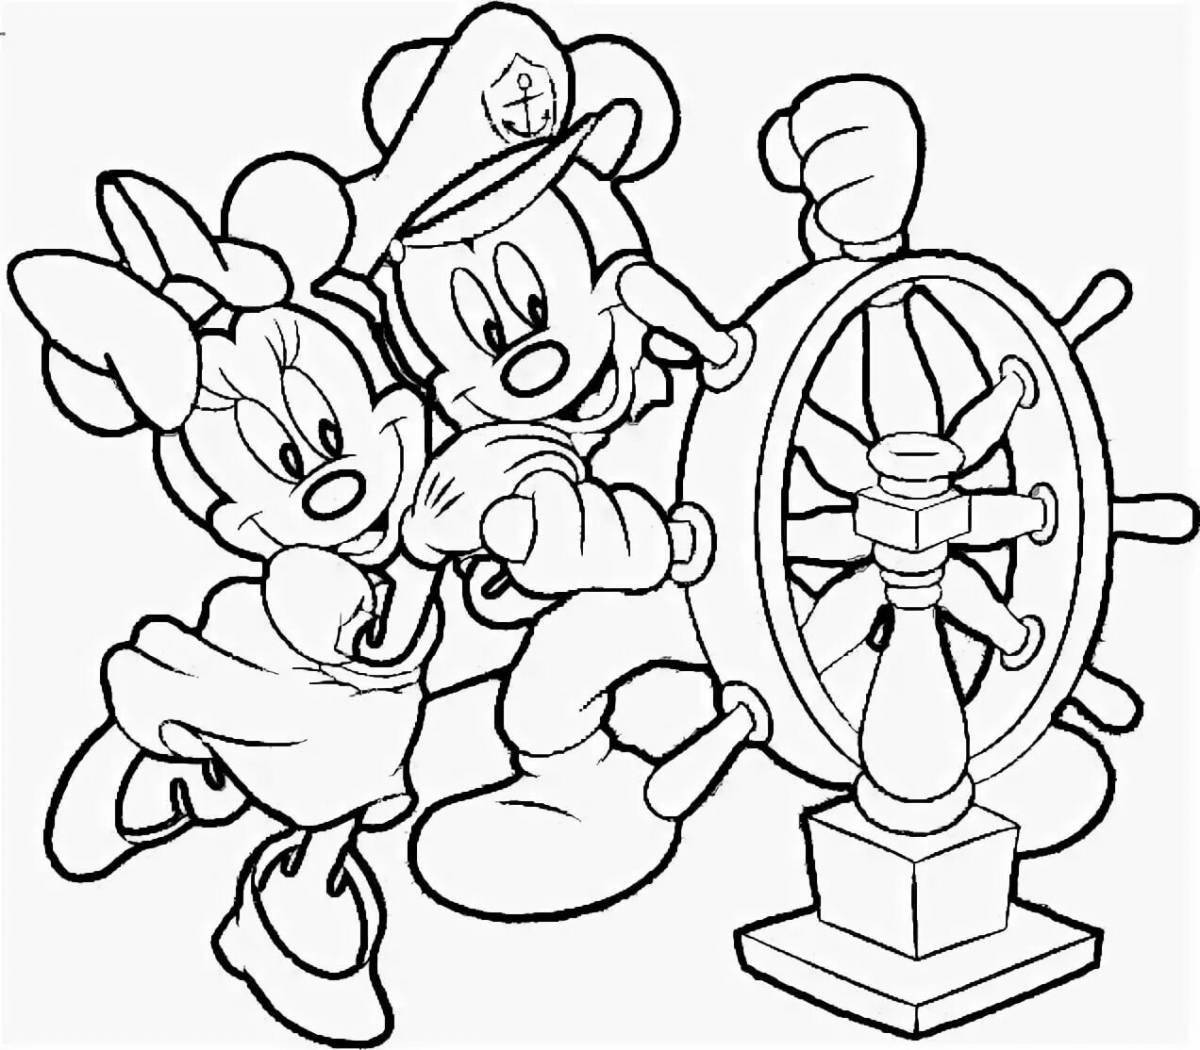 Adorable children's coloring book download